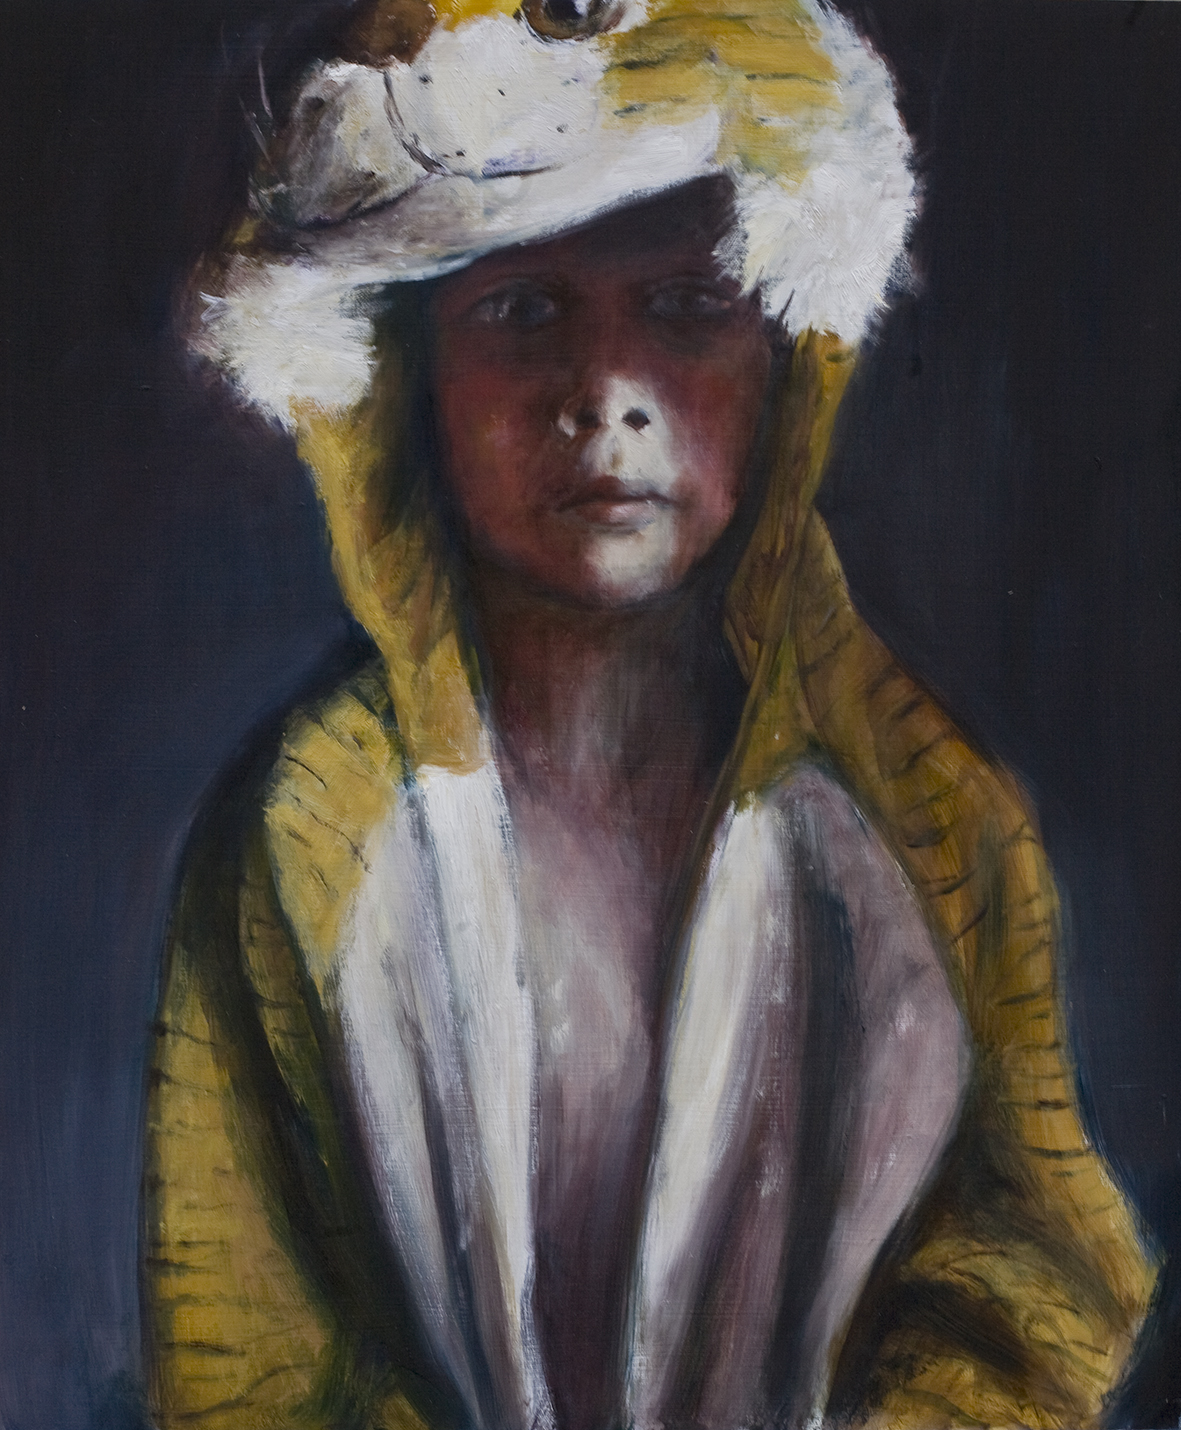   Boy with tiger suit  Oil on board 55x46 cm 2008 